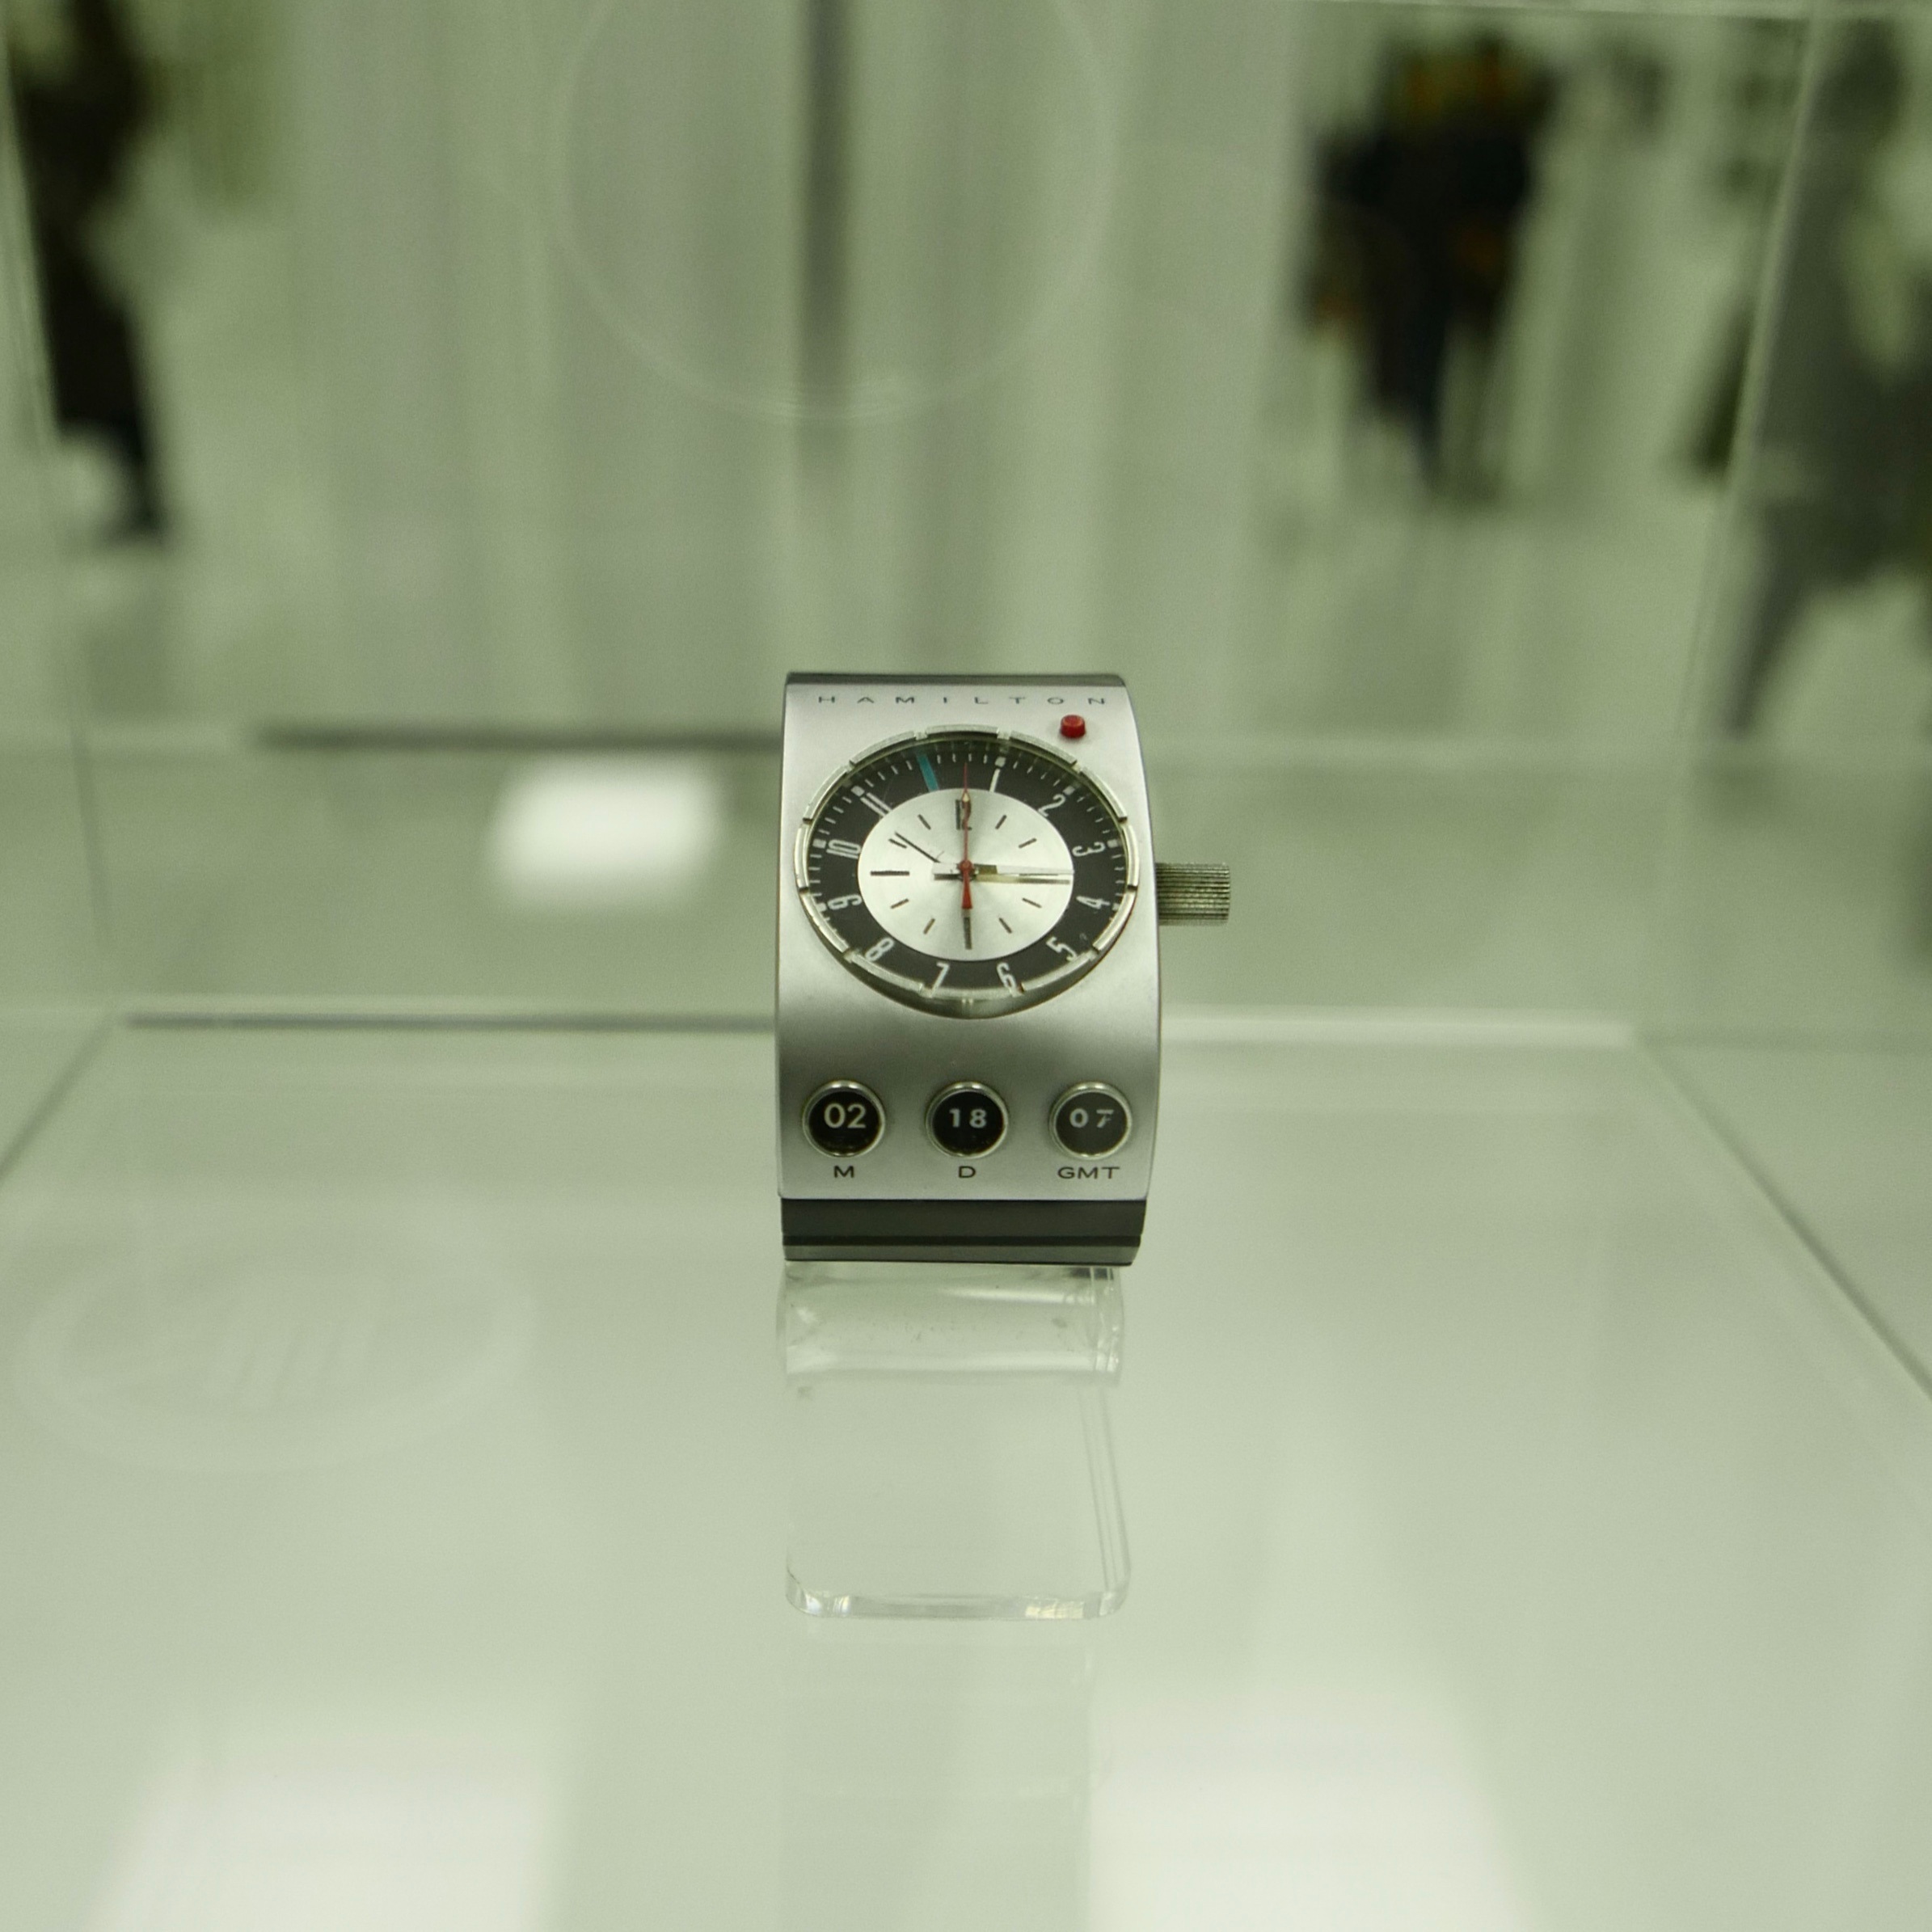 A clock from Kubricks 2001: A Space Odyssey